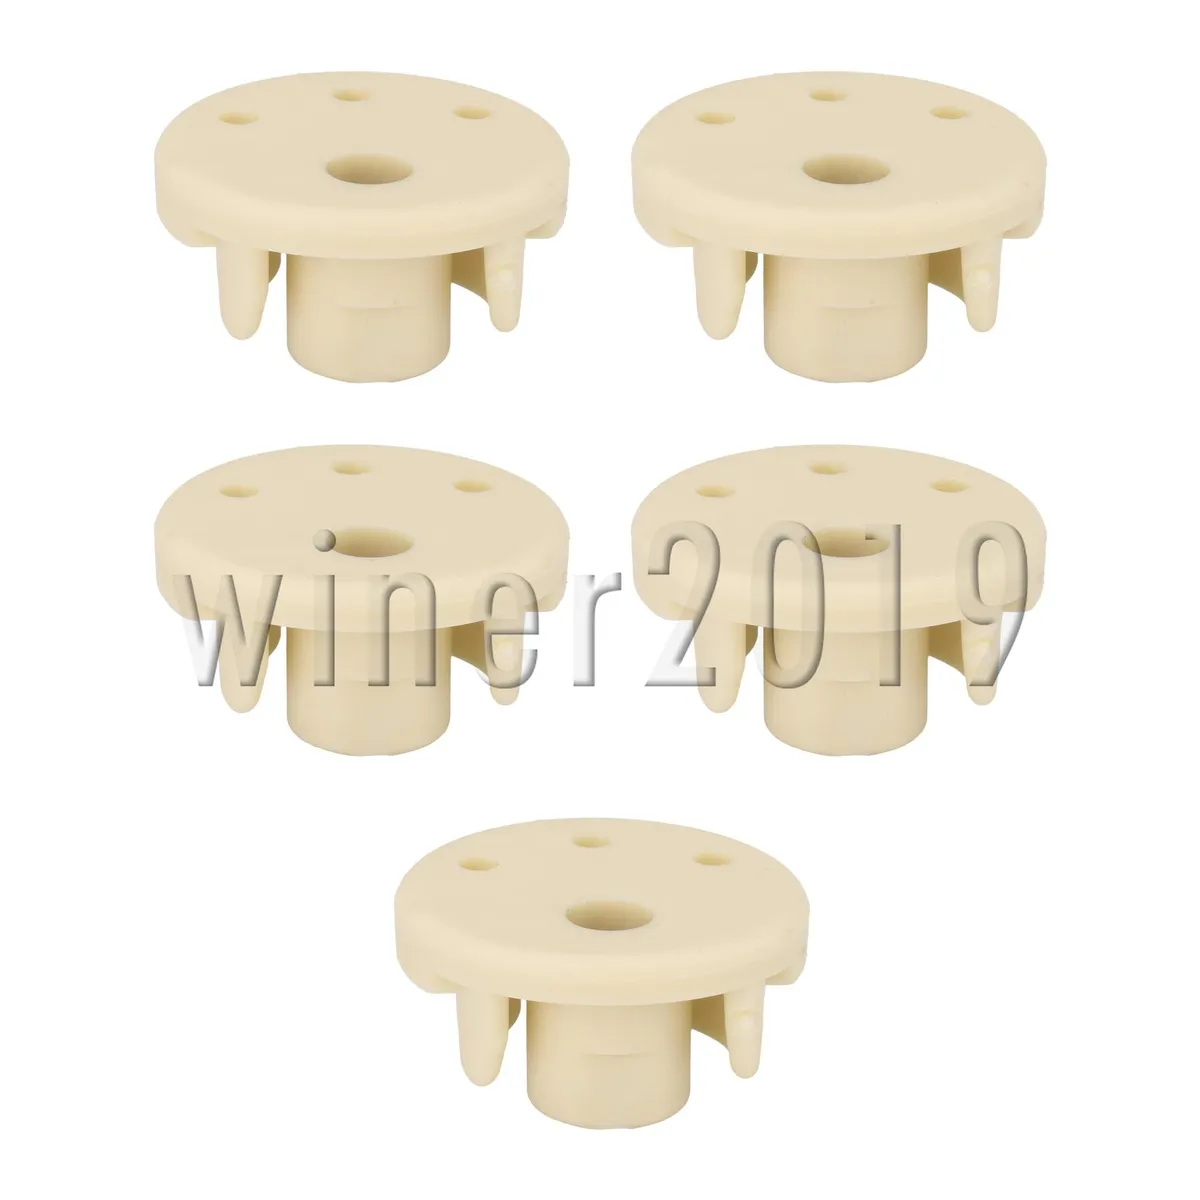 5PCS Vertical Mixer Bottom Rubber Foot Replacement for KitchenAid